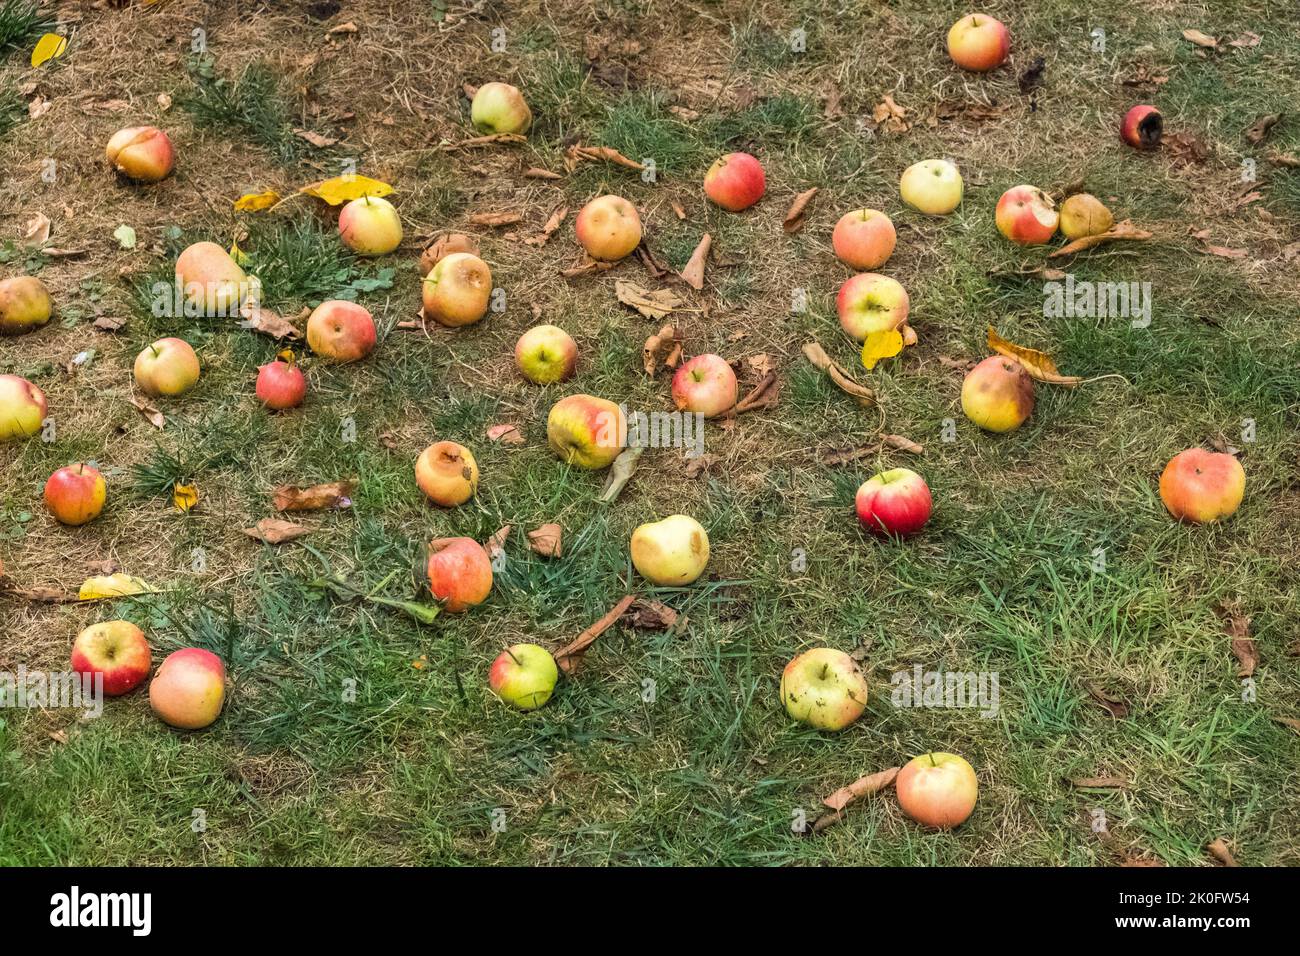 Windfall apples fallen on the ground in September. Suffolk, UK. Stock Photo